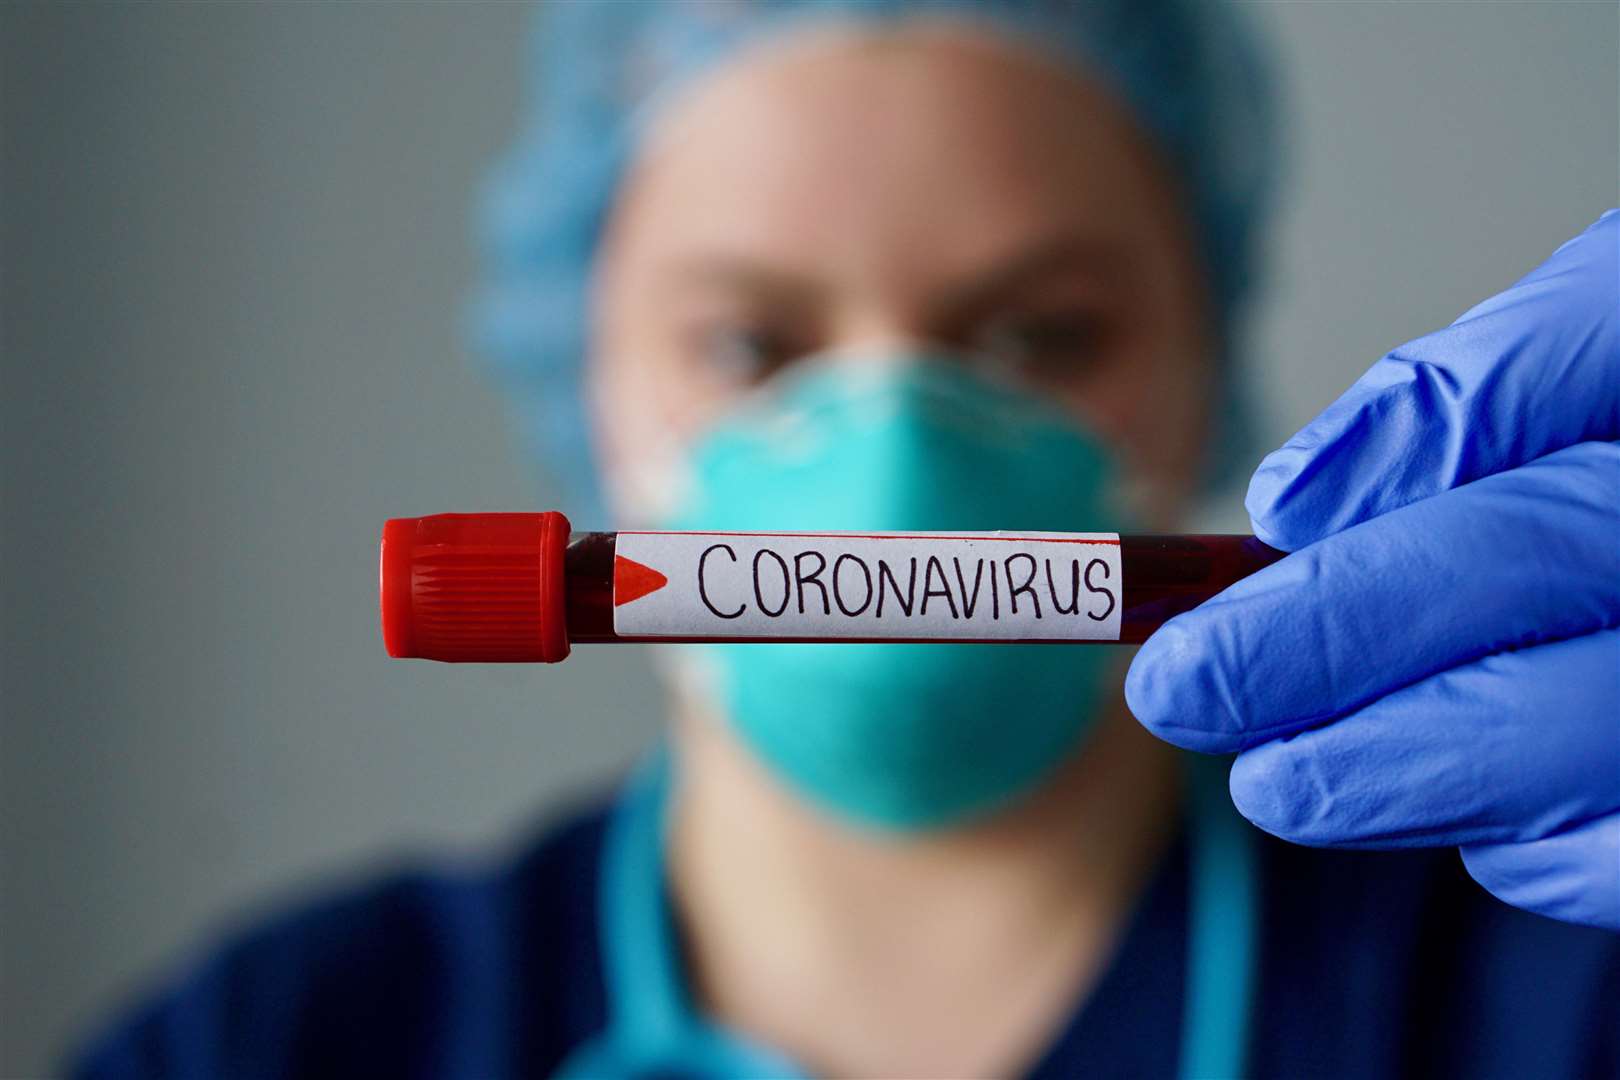 Coronavirus cases in the UK had reached 36 by March 1